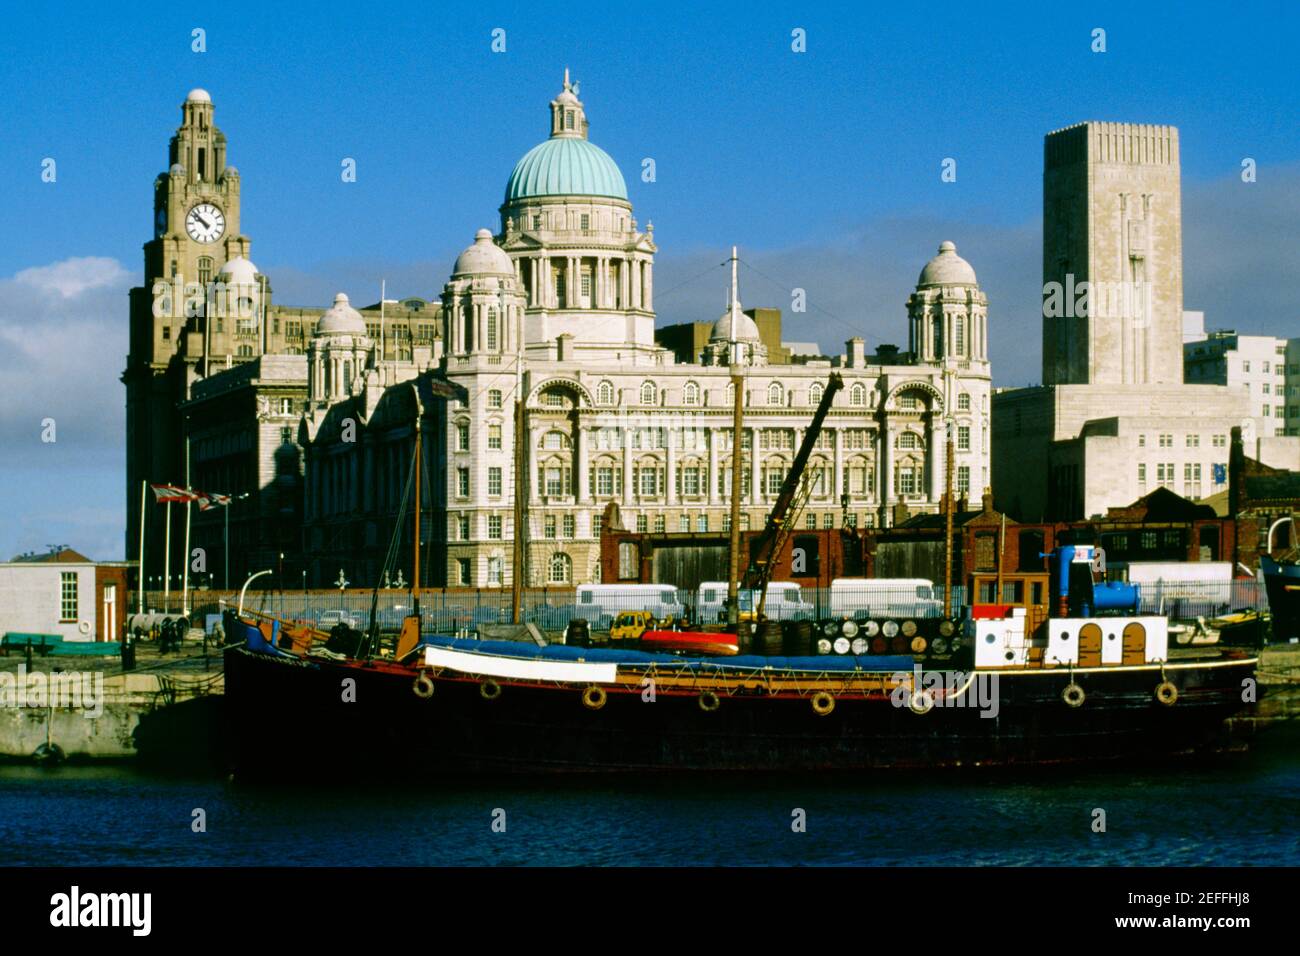 A barge docked beside a domed building and a clock tower, Liverpool, England Stock Photo